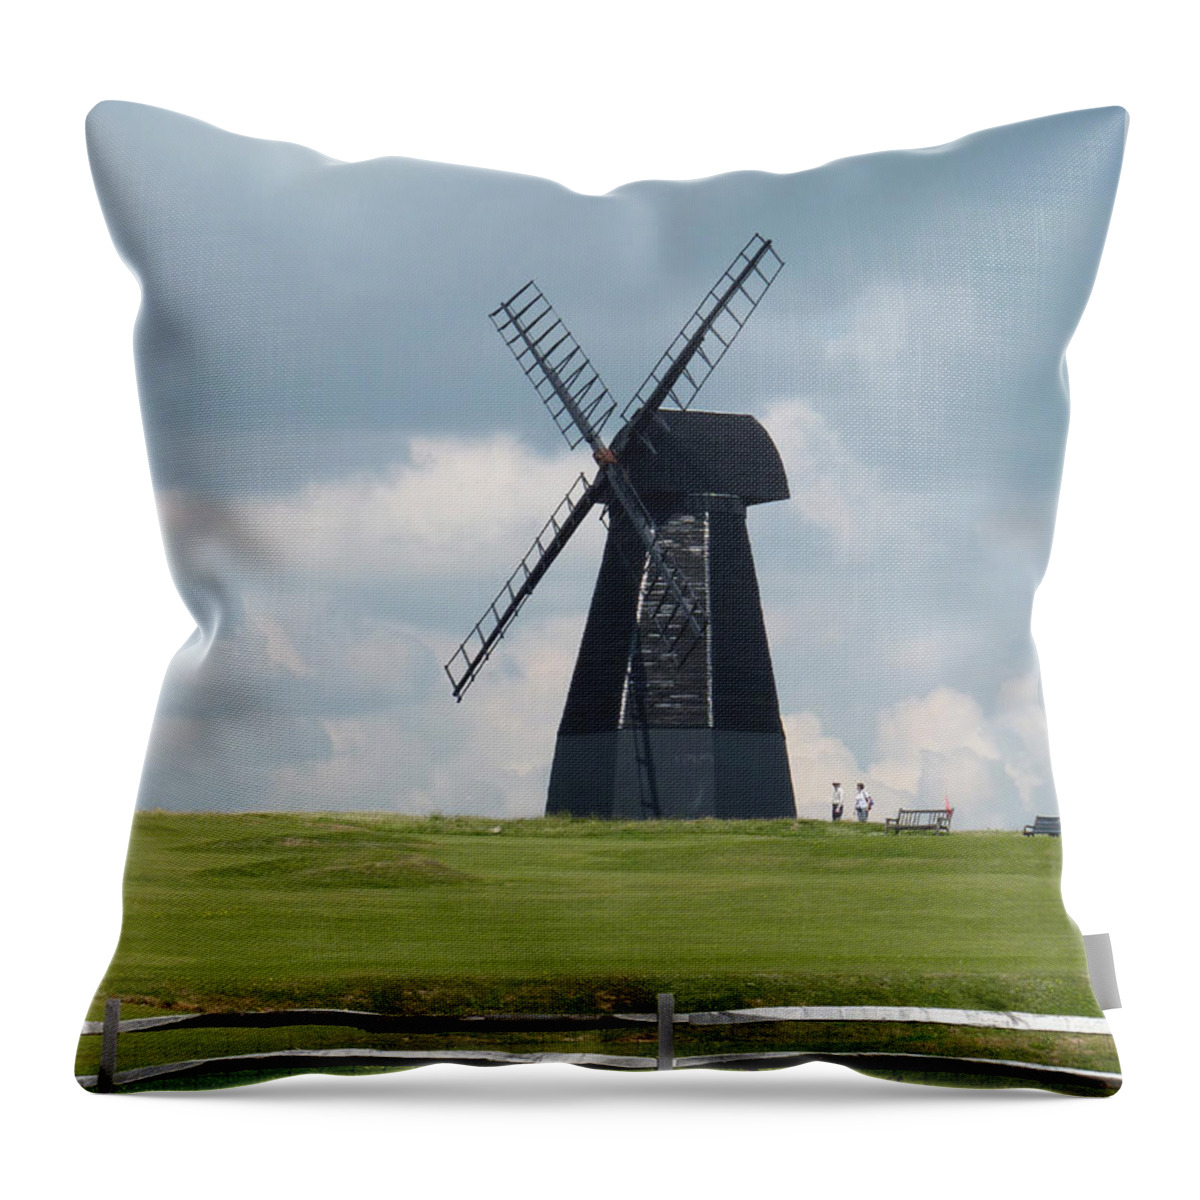 Rottingdean Throw Pillow featuring the photograph Rottingdean Windmill - Sussex - England by Phil Banks